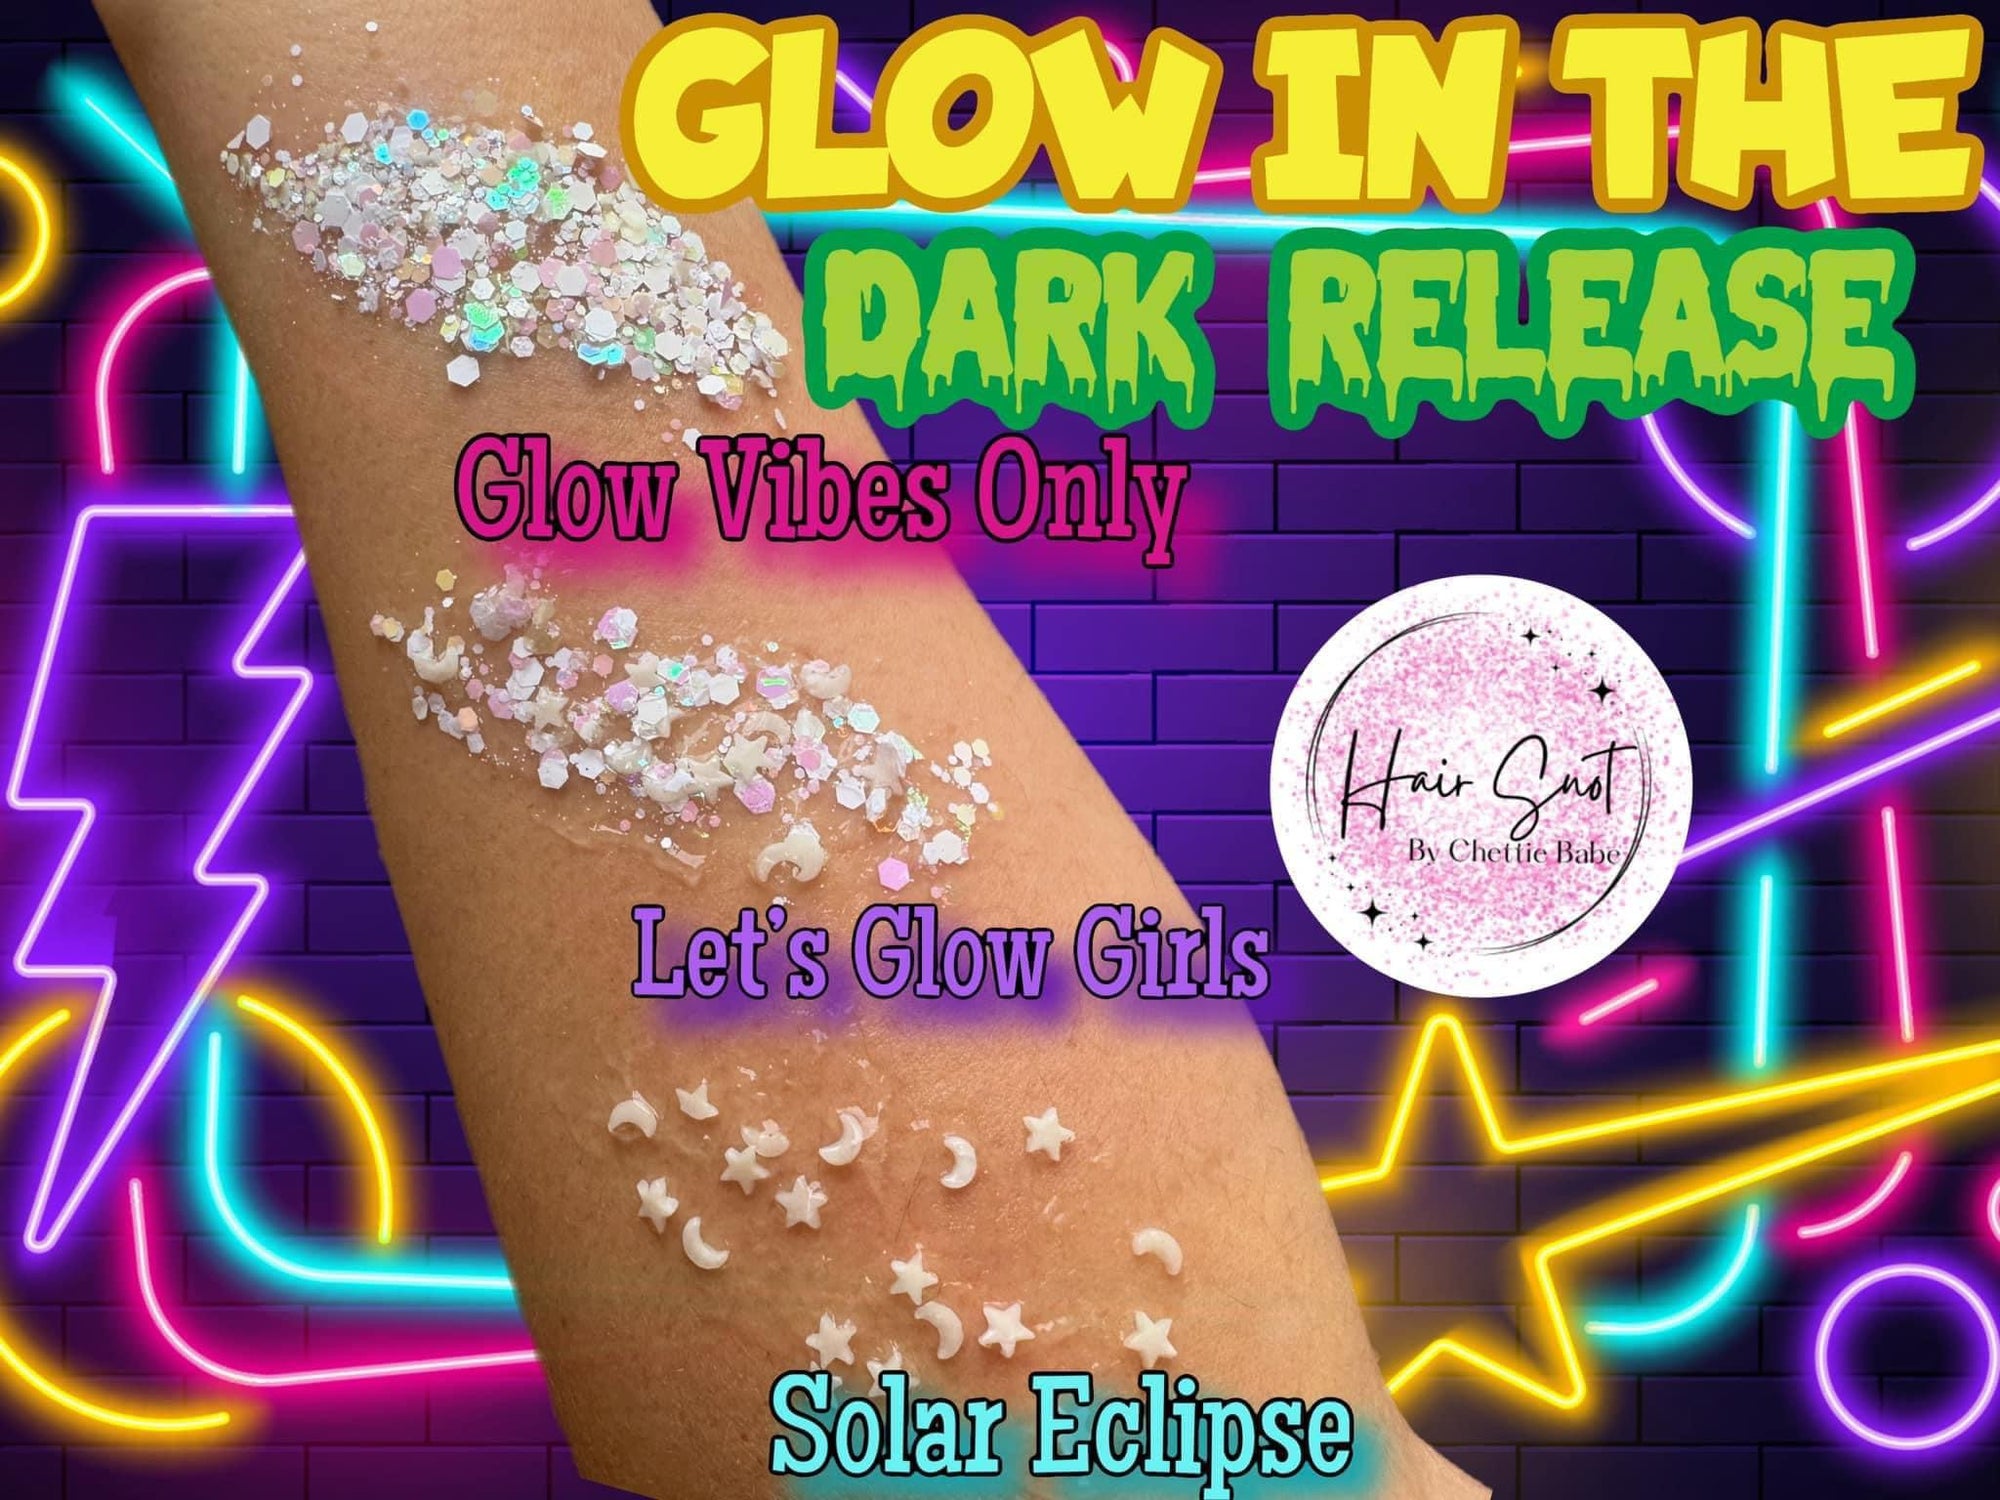 Glow In The Dark Hair Snot {Pre-Order} Closes March 15th @5pm